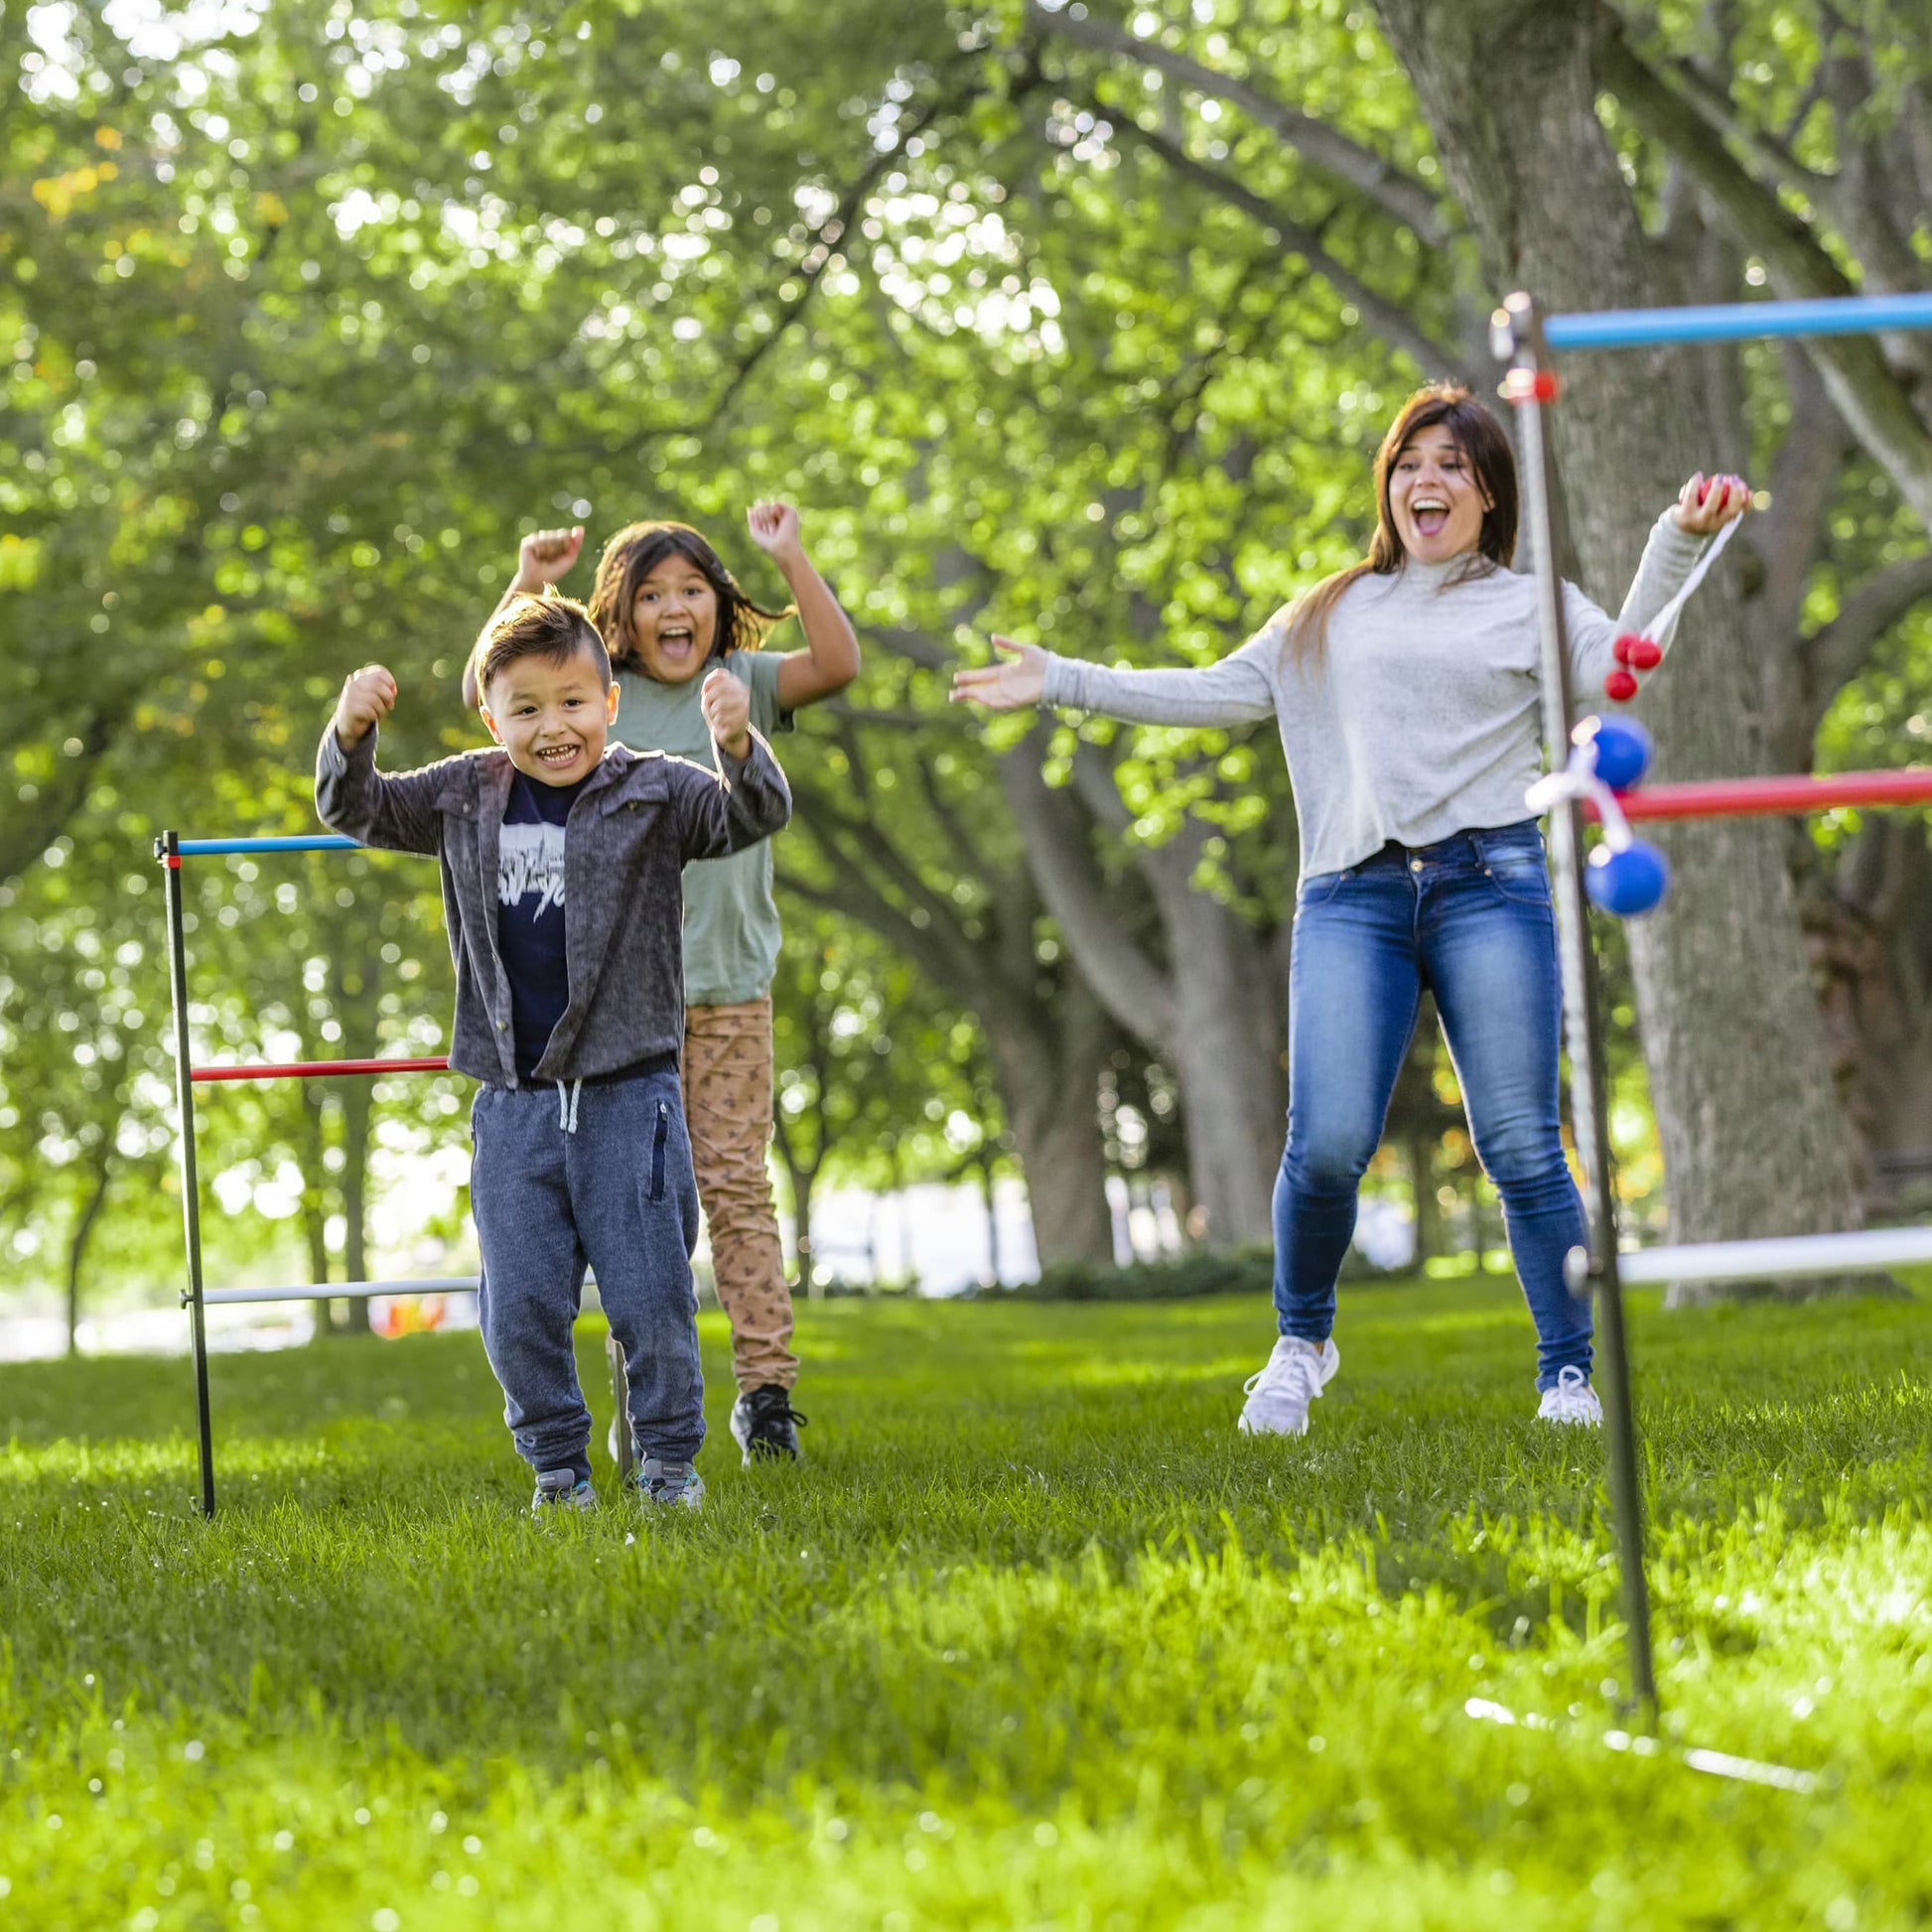 Sportcraft Steel Ladder Toss Lifestyle Image, Young family playing game in a park